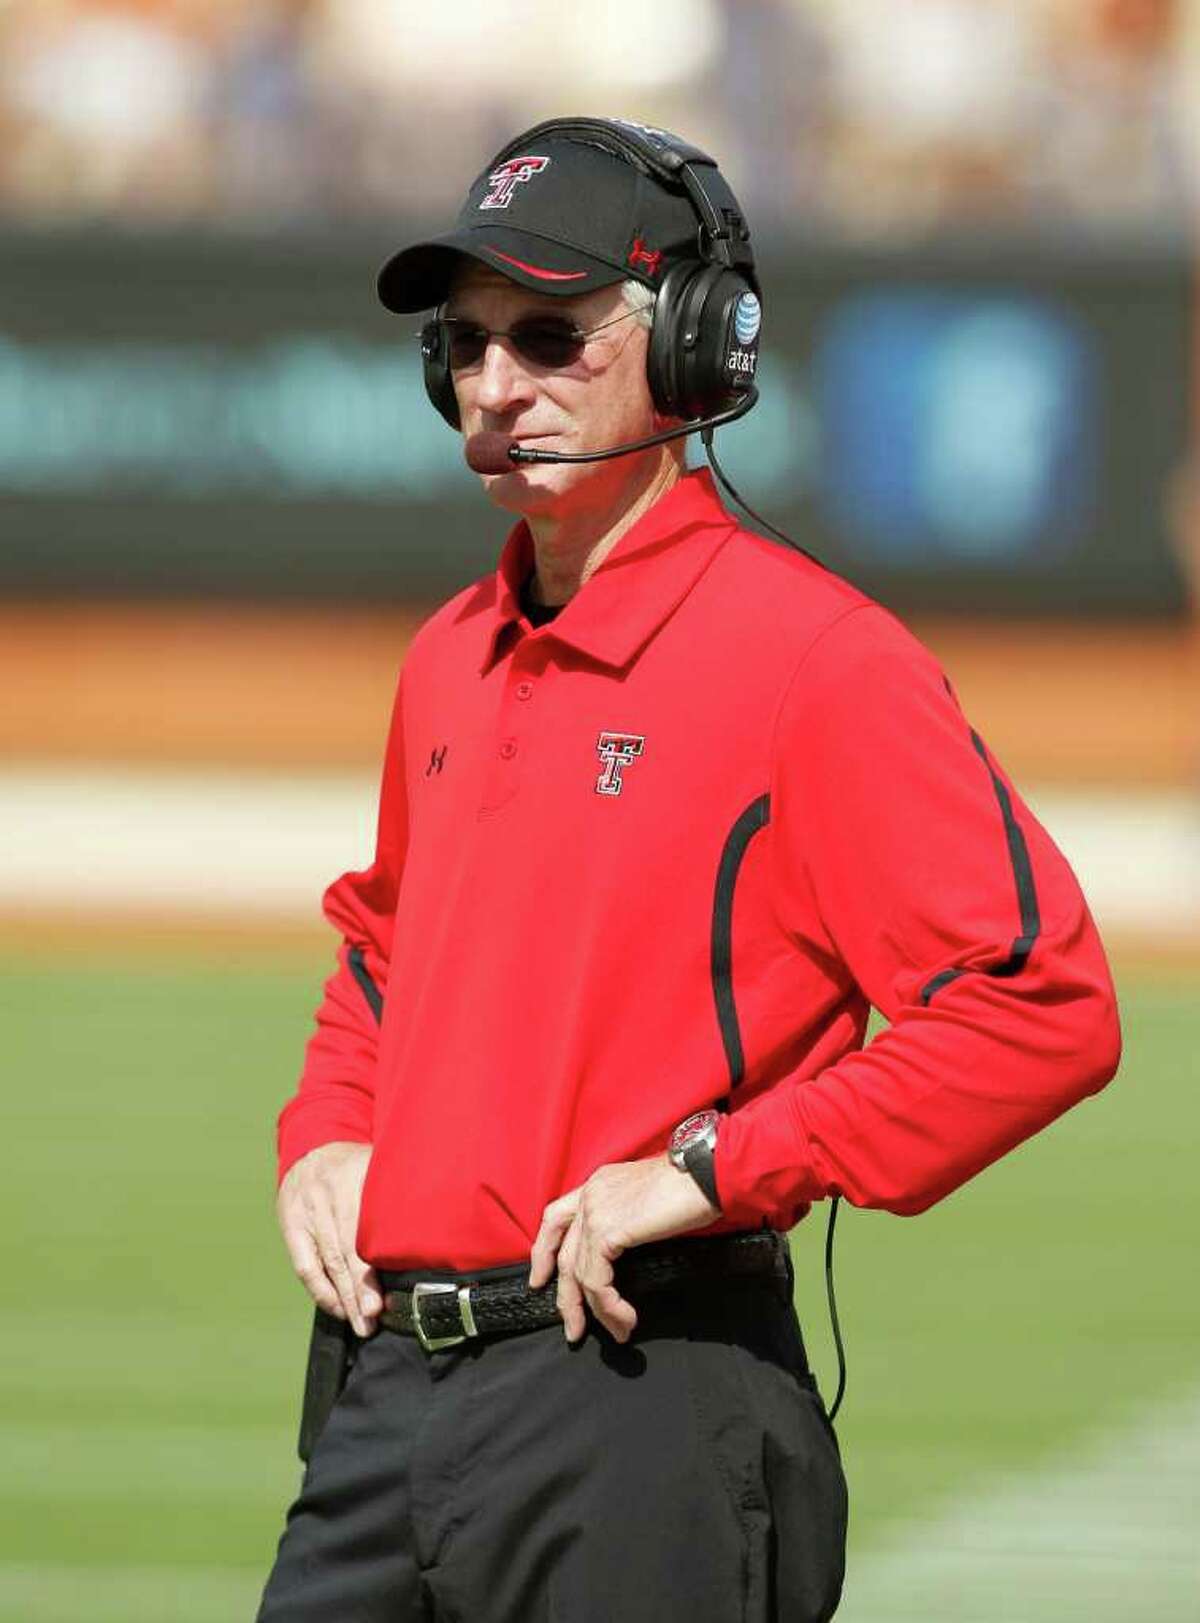 A coach may be headed for politics Former Texas Tech coach Tommy Tuberville is without a sideline job right now. But, CBSSports.com reports that he is polling to test a run for governor of Alabama in 2018. >>>Scroll through the gallery to see other sports figures who have made attempts and - and in some cases made careers in - politics